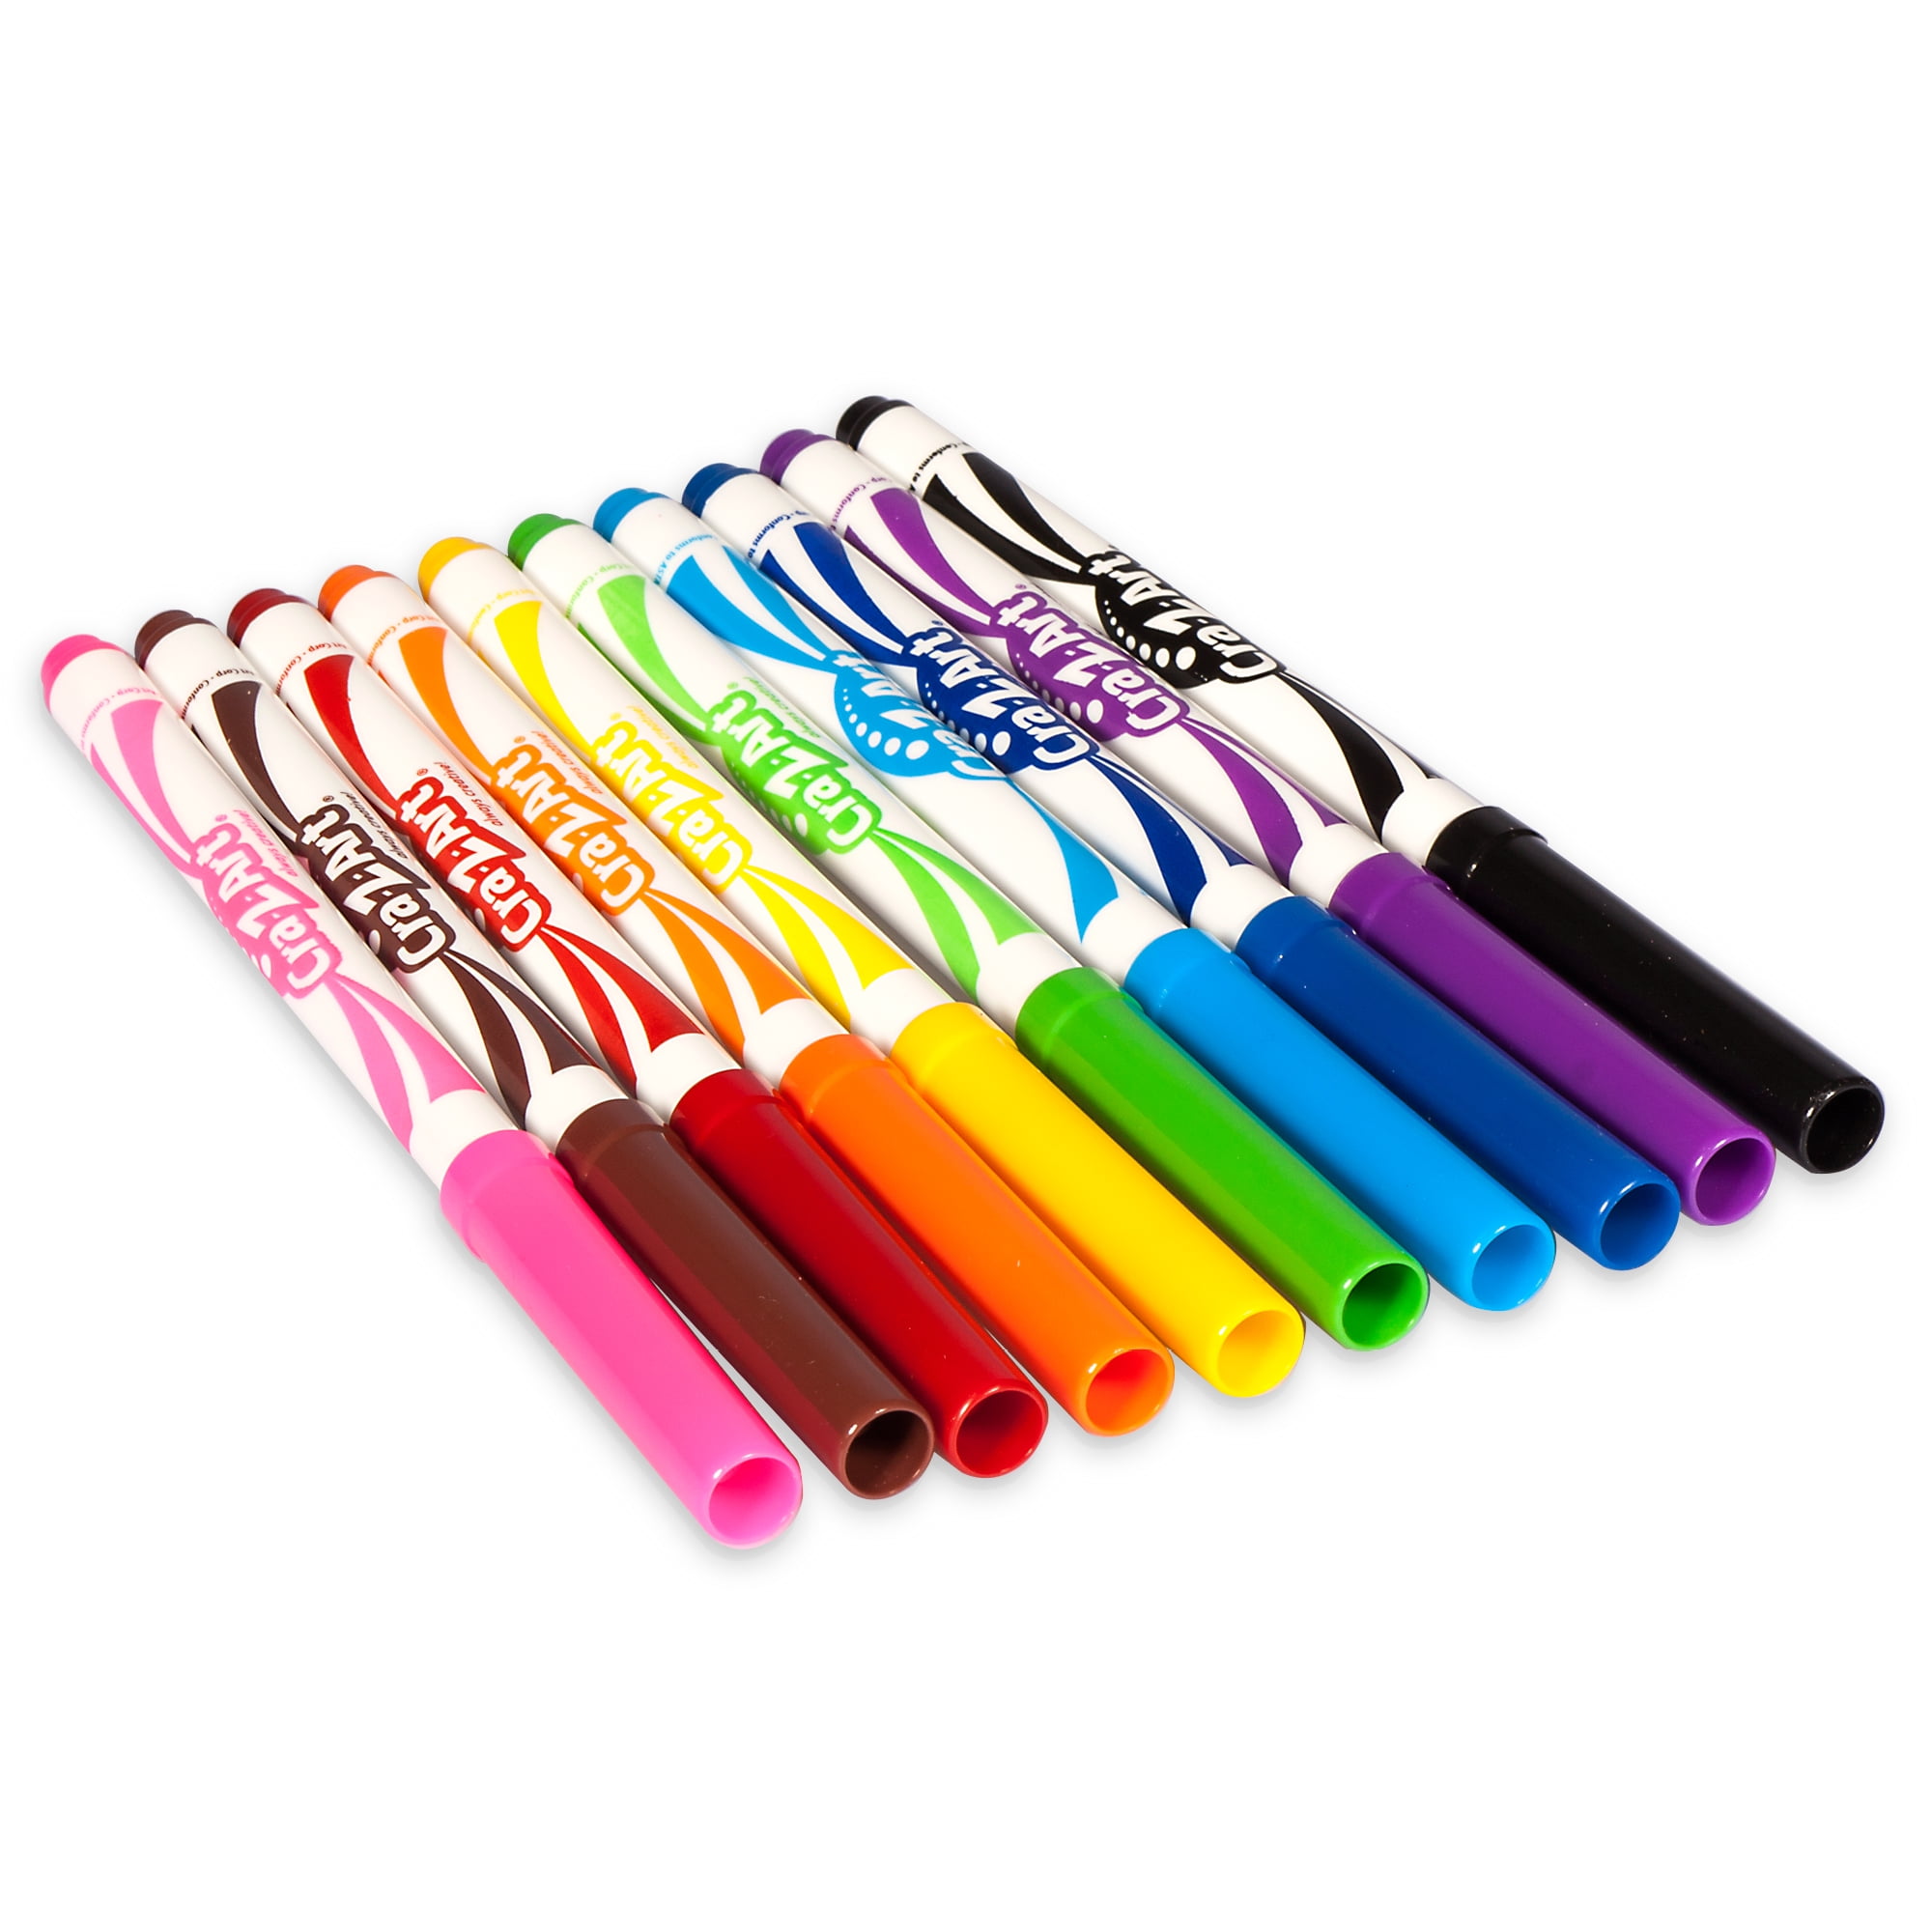  ARTEZA Kids Fine Tip Washable Markers, 42 Bright Colors, 36  Washable Marker Pens and 6 Non-Washable Neon Pens, School Supplies for Kids  Ages 3 and Up : Toys & Games